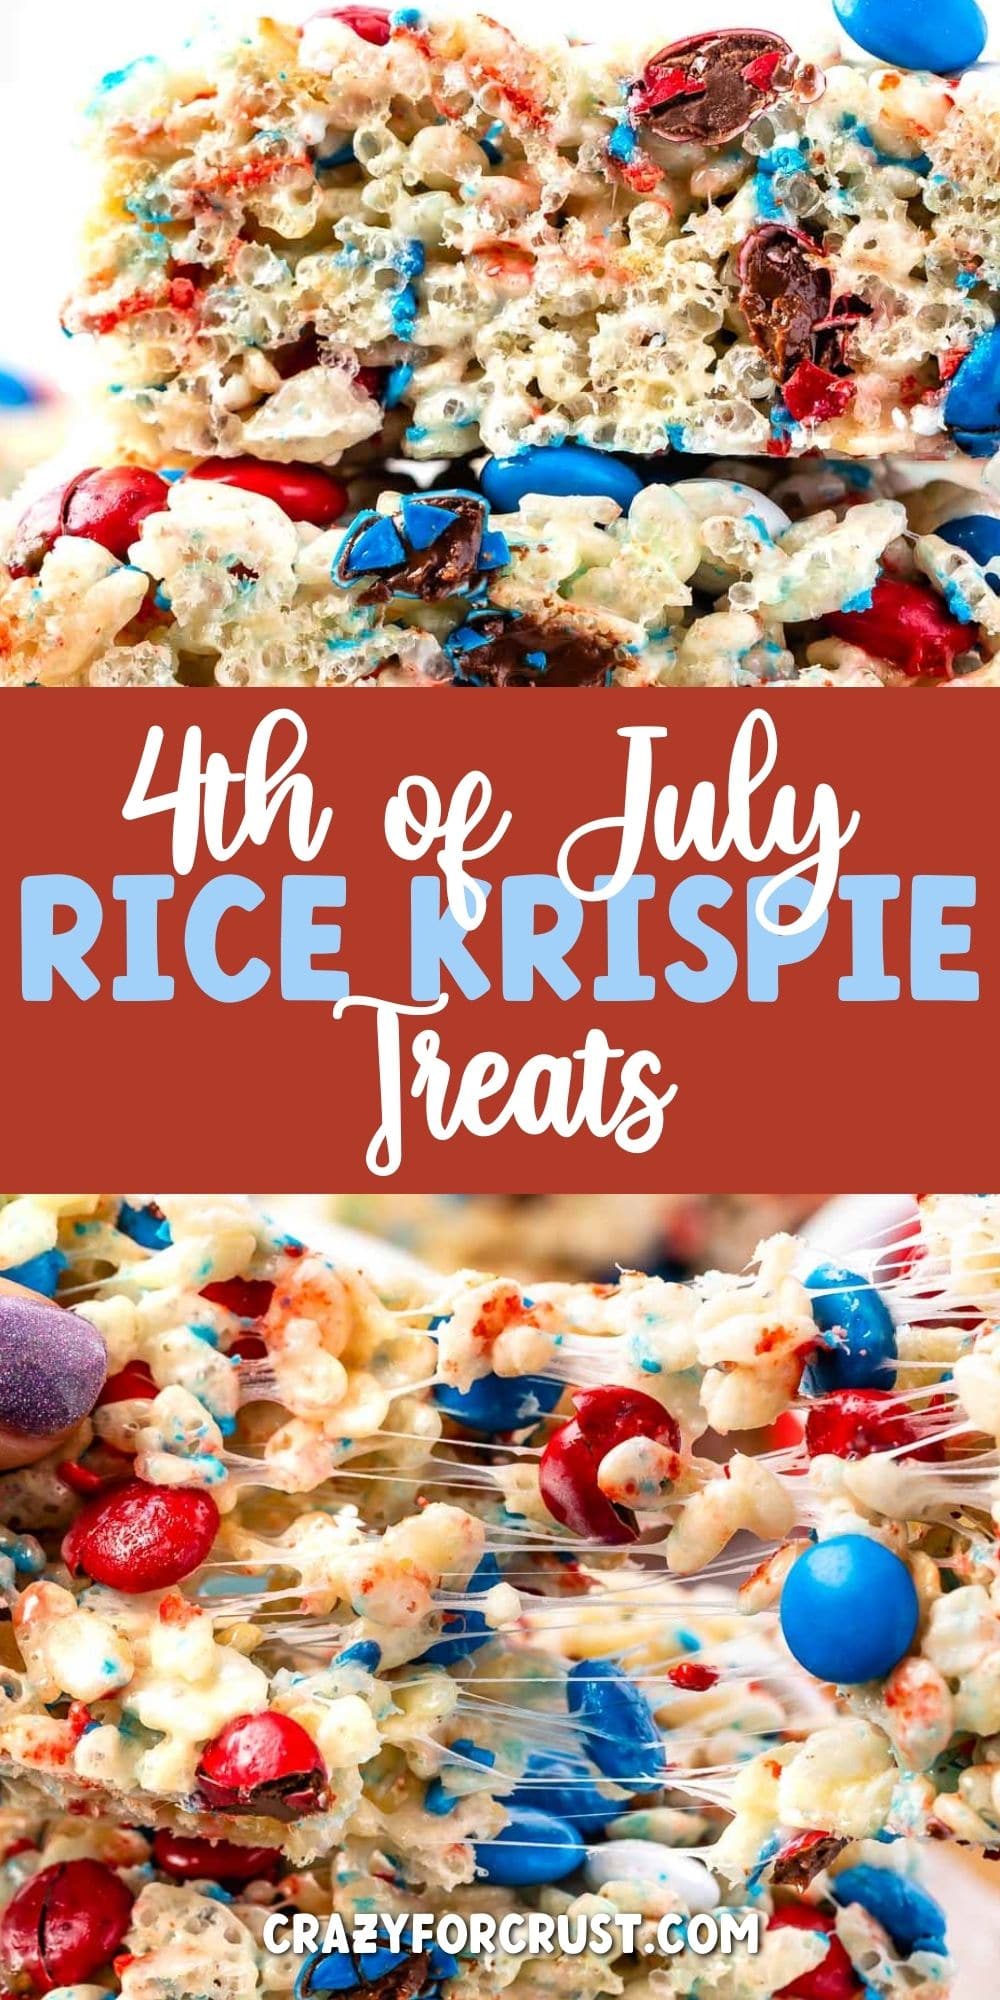 4th of july rice krispie treat photo collage with recipe title in the middle of two photos